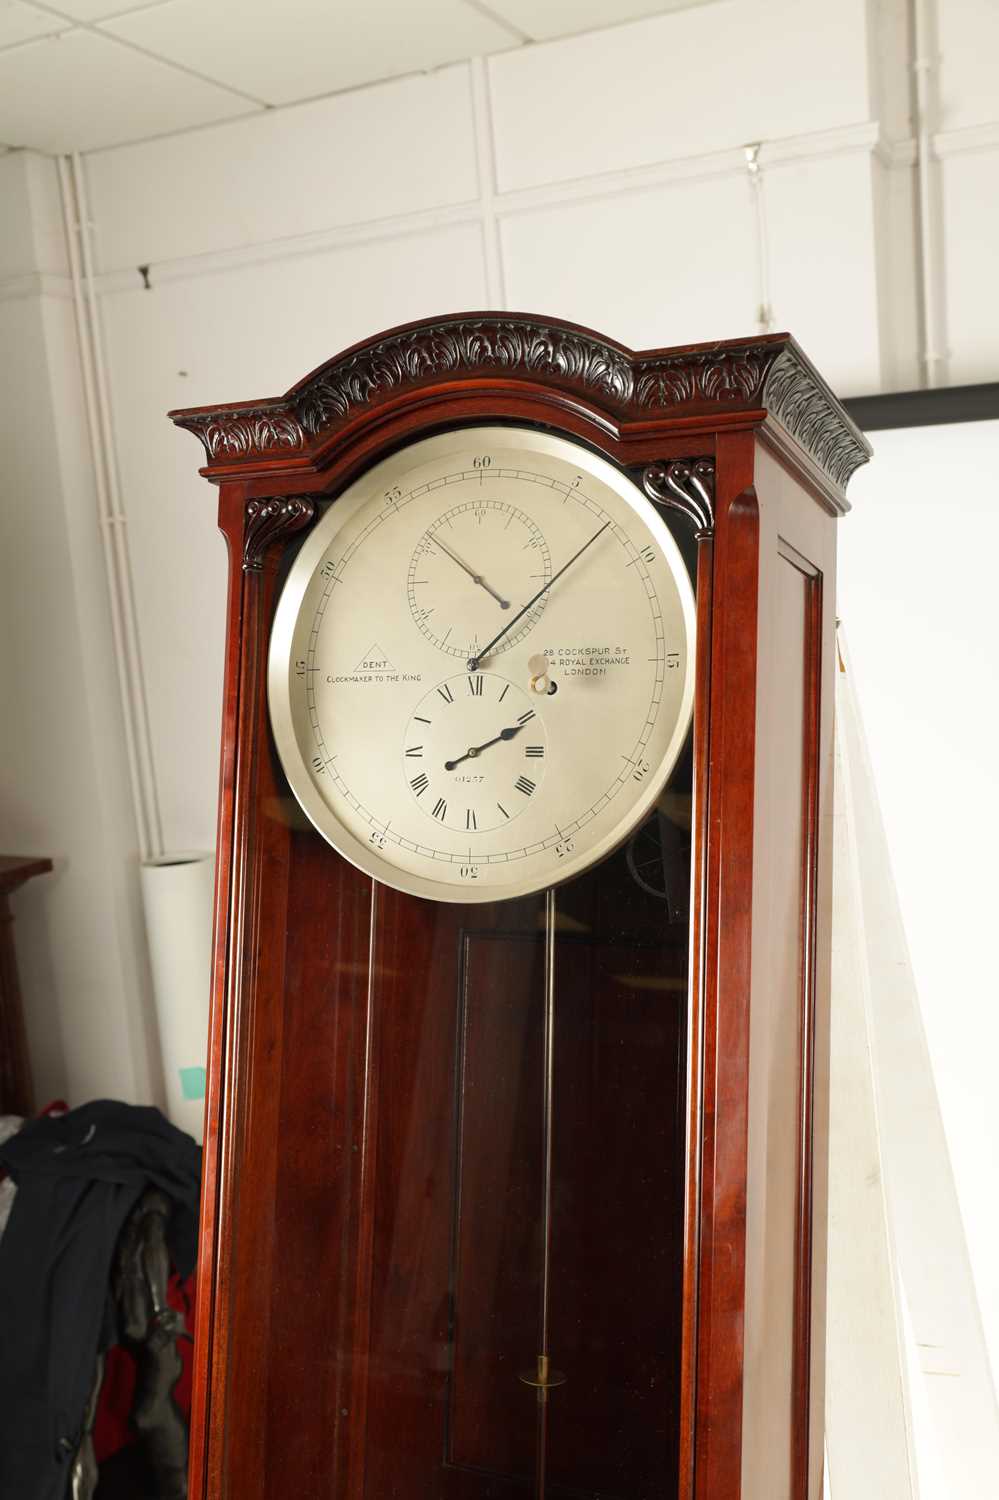 DENT, ROYAL EXCHANGE, LONON. NO. 61257. A FINE MONTH DURATION WALL MOUNTED MAHOGANY REGULATOR CLOCK - Image 13 of 18